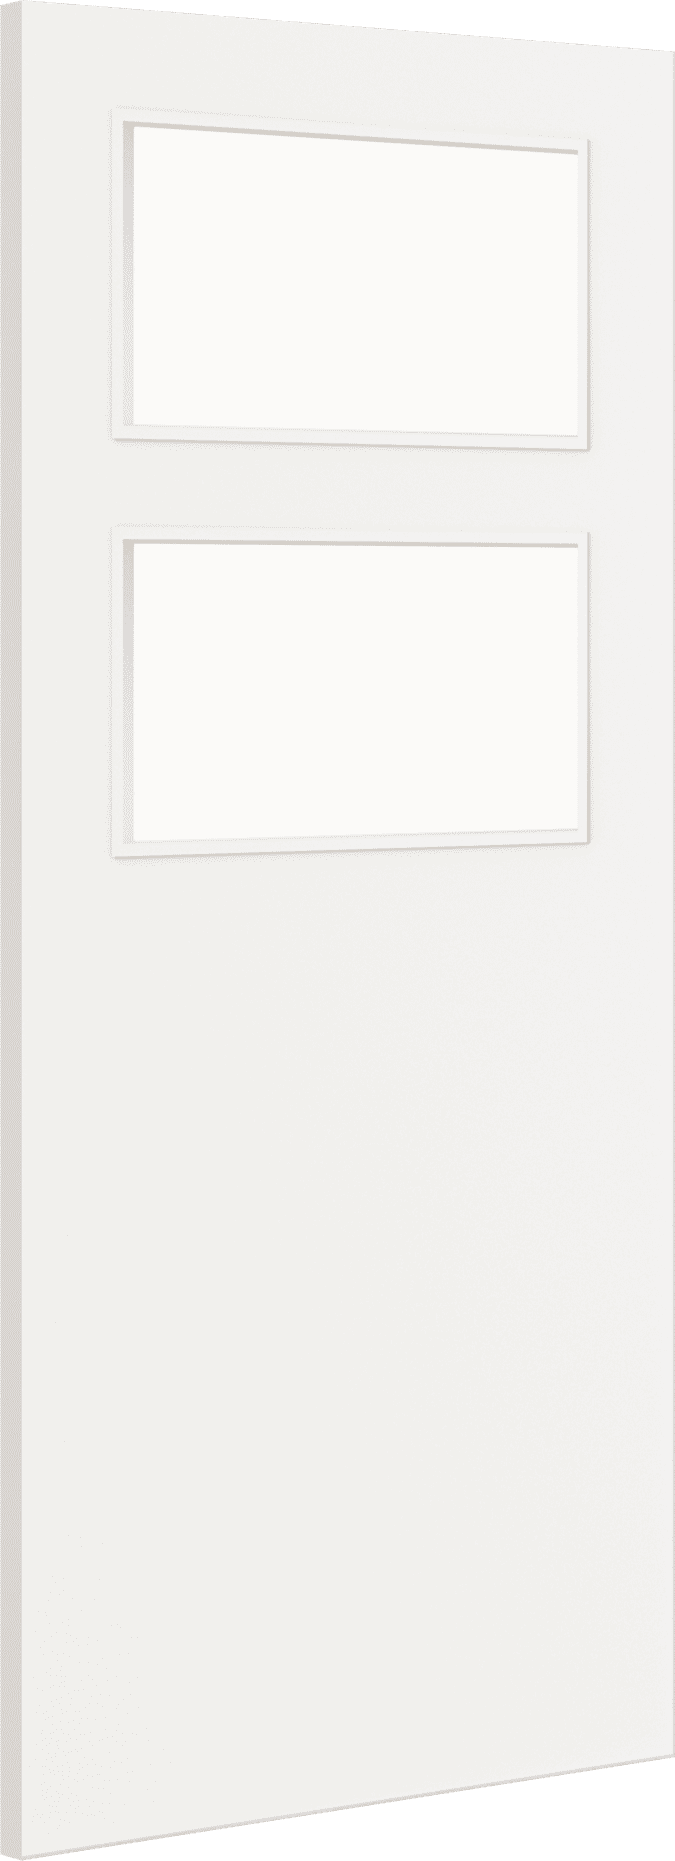 1981mm x 533mm x 44mm (21") Architectural Paint Grade White 02 Clear Glazed Fire Door Blank